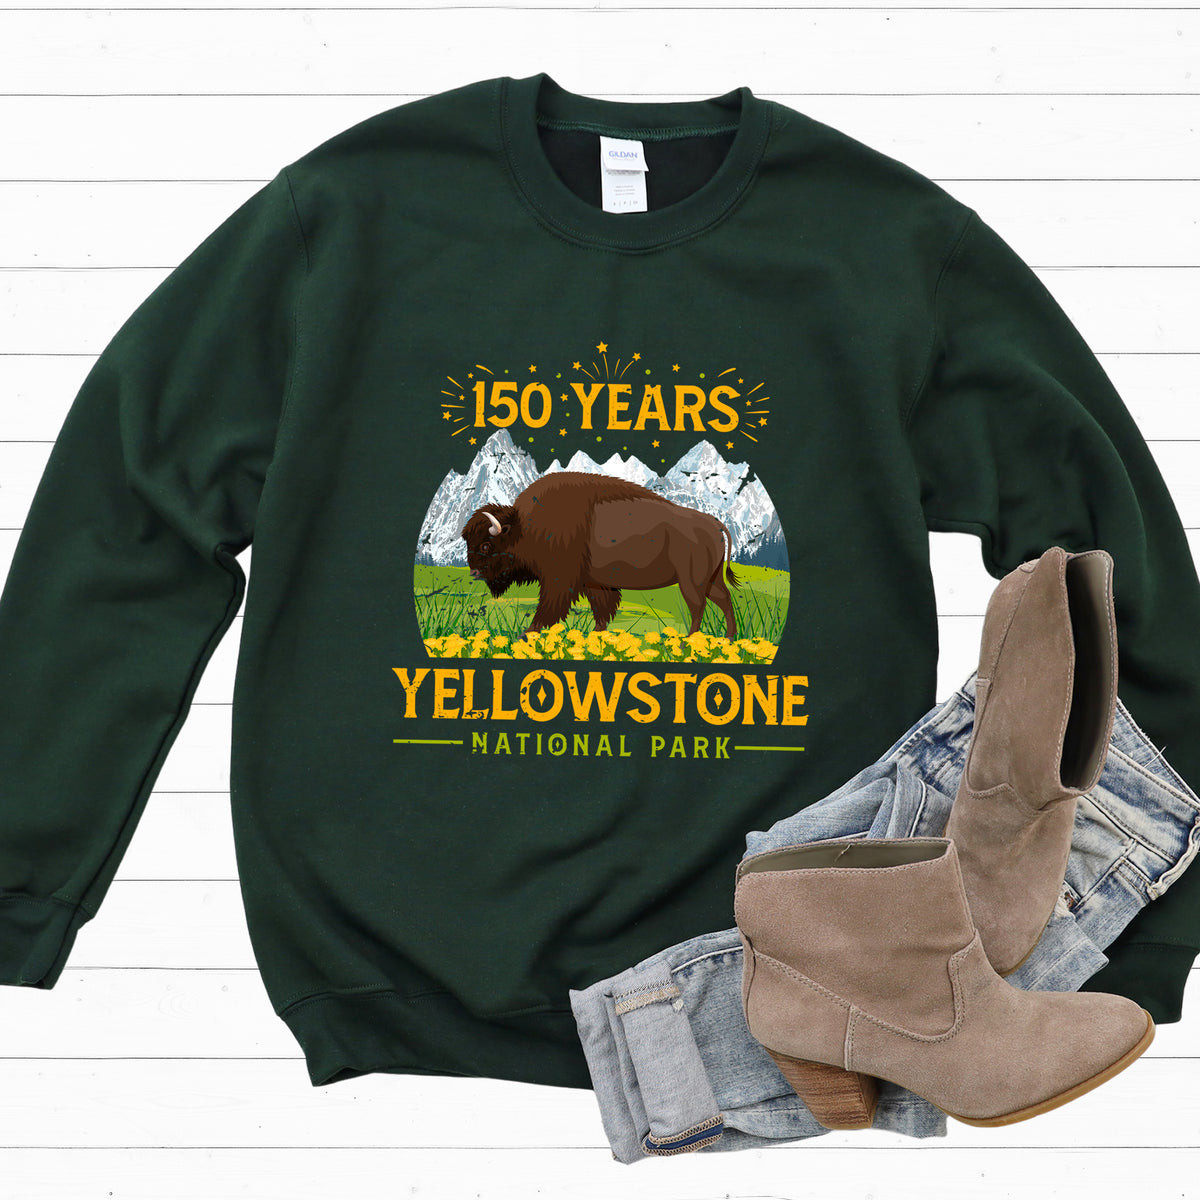 OTHER STYLES Message us at info@mjteeboutique.com if you would like to see this design on other styles OR if you would like it customized! | Forest Green Sweatshirt